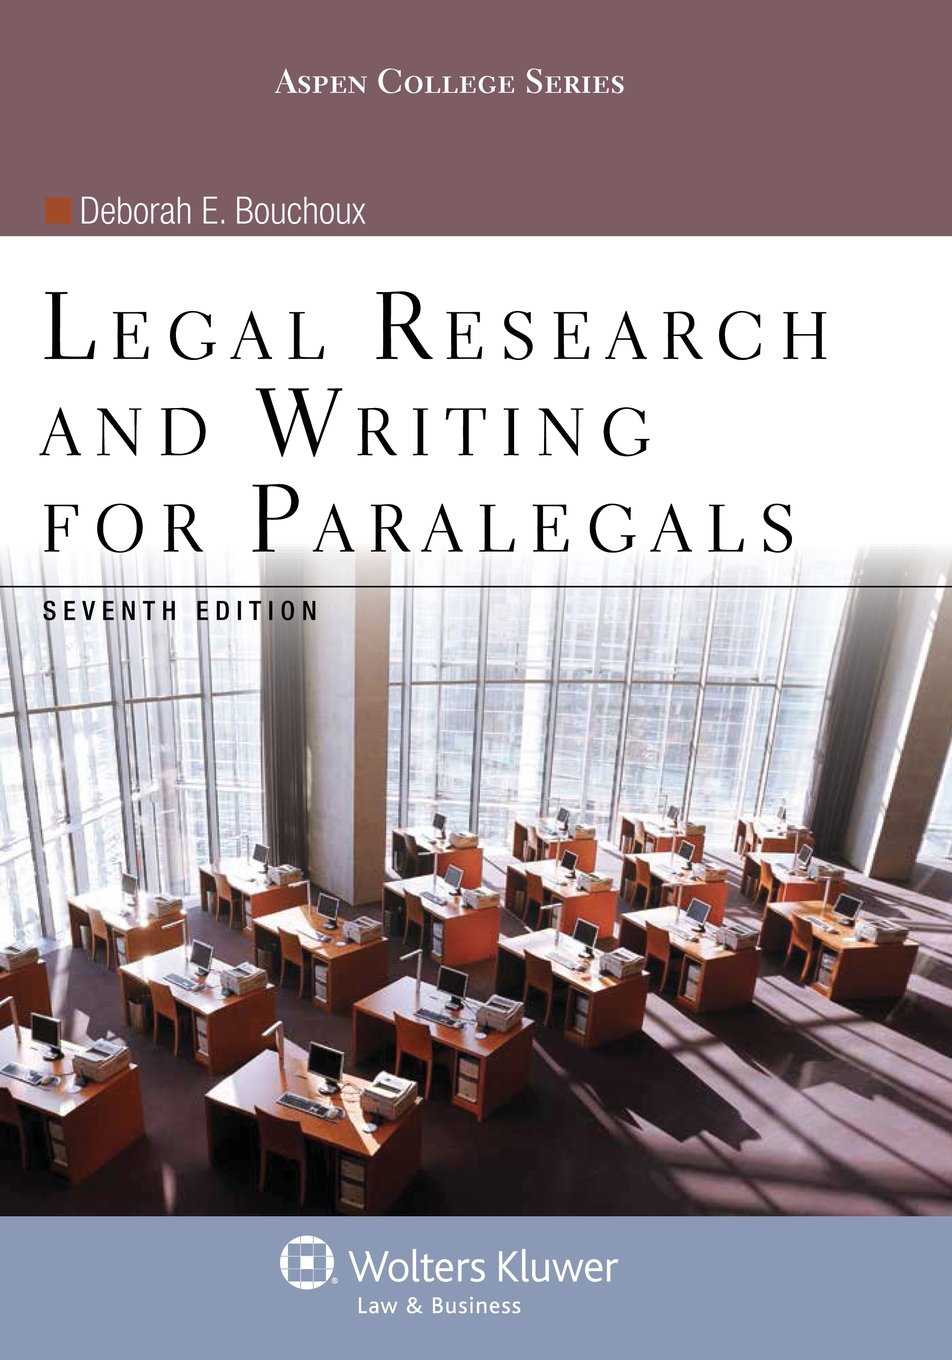 Legal Research & Writing for Paralegals Seventh Edition (Aspen College)